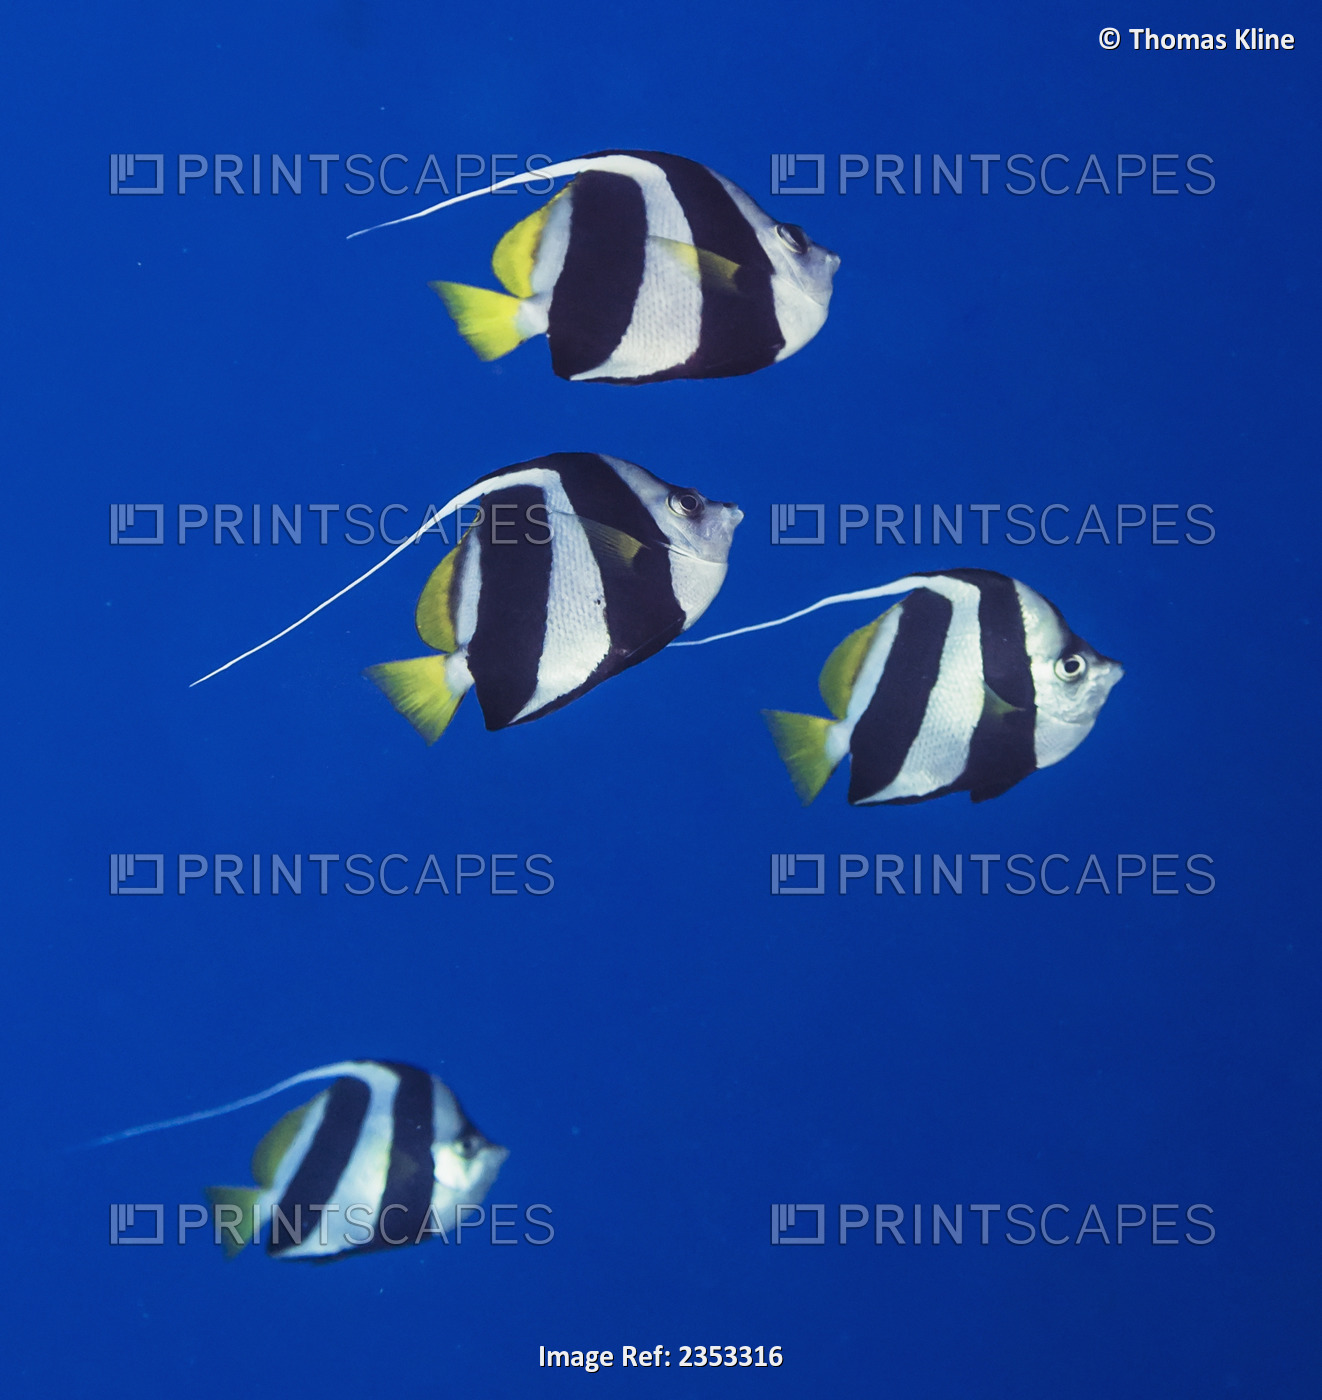 Underwater view of a Pennant Butterflyfish at Molokini Crater, Maui, Hawaii.